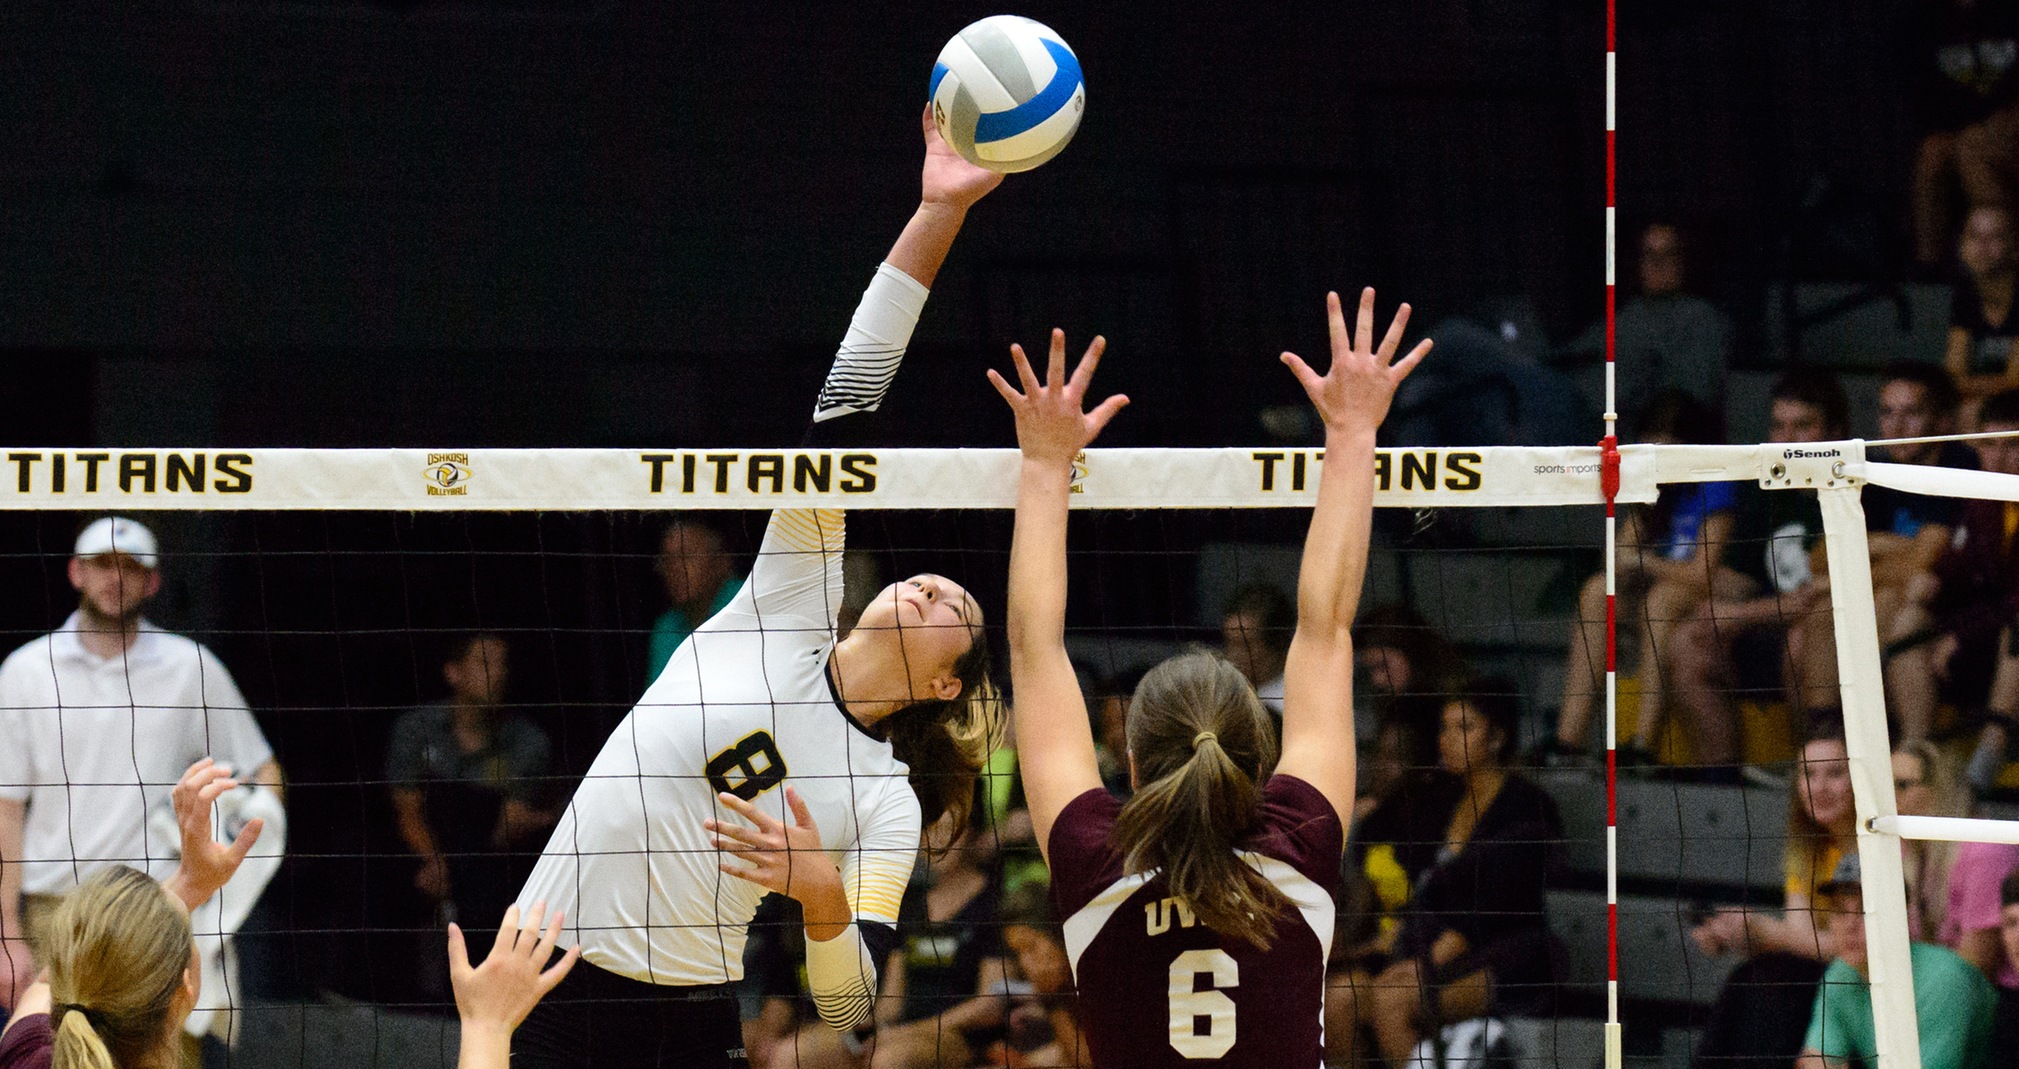 Tina Elstner paced the Titans in kills during both matches, recording 16 against University of Chicago and a season-high 18 against Tufts University.